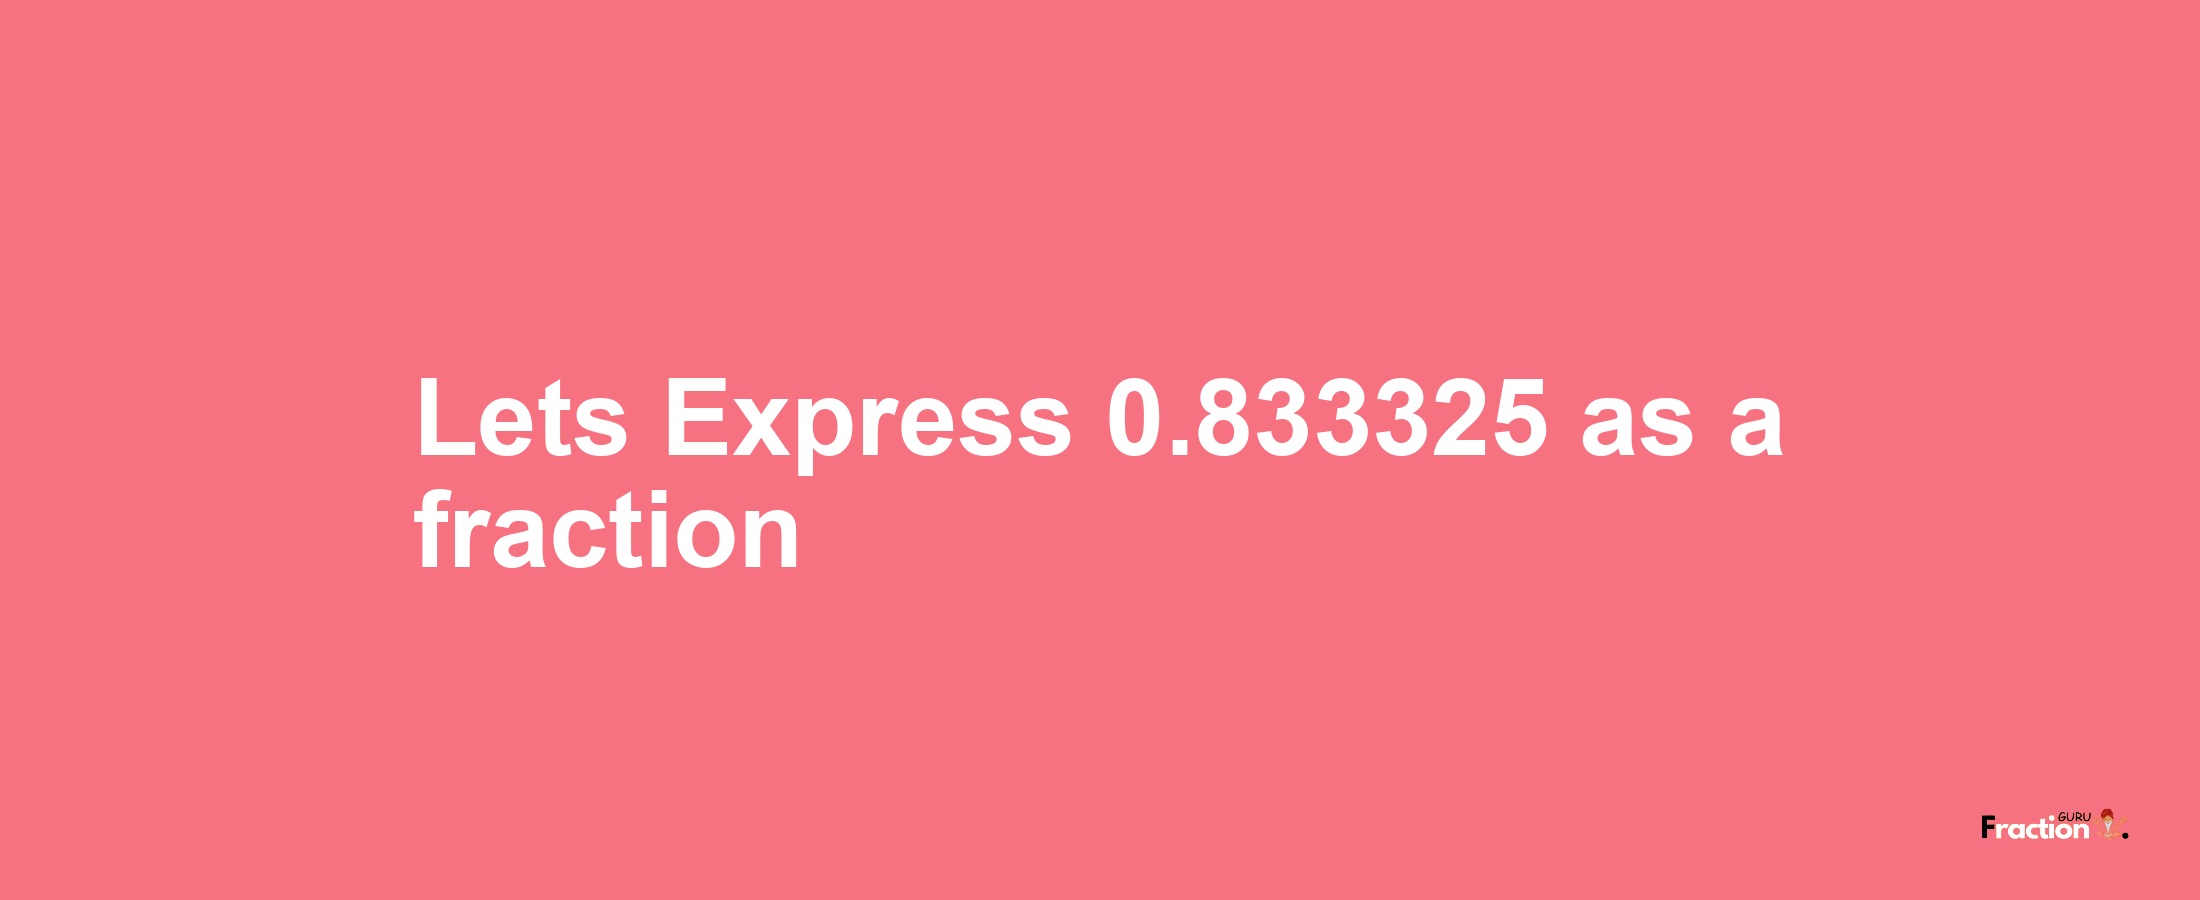 Lets Express 0.833325 as afraction